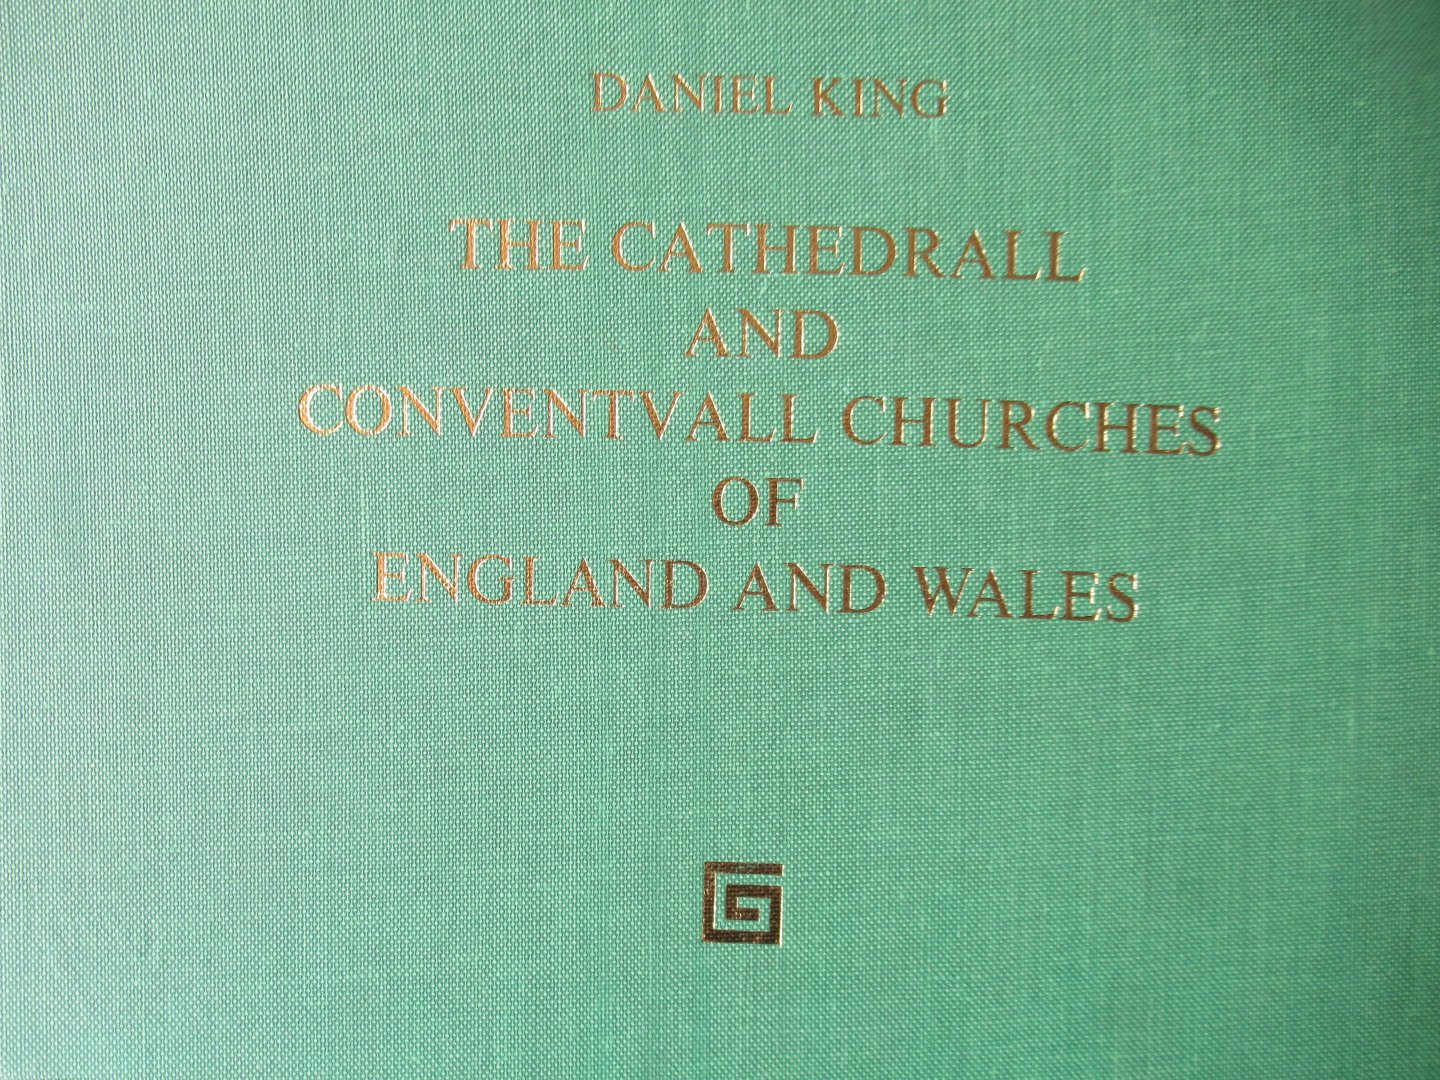 King, Daniel - The cathedrall and conventvall churches of England and Wales